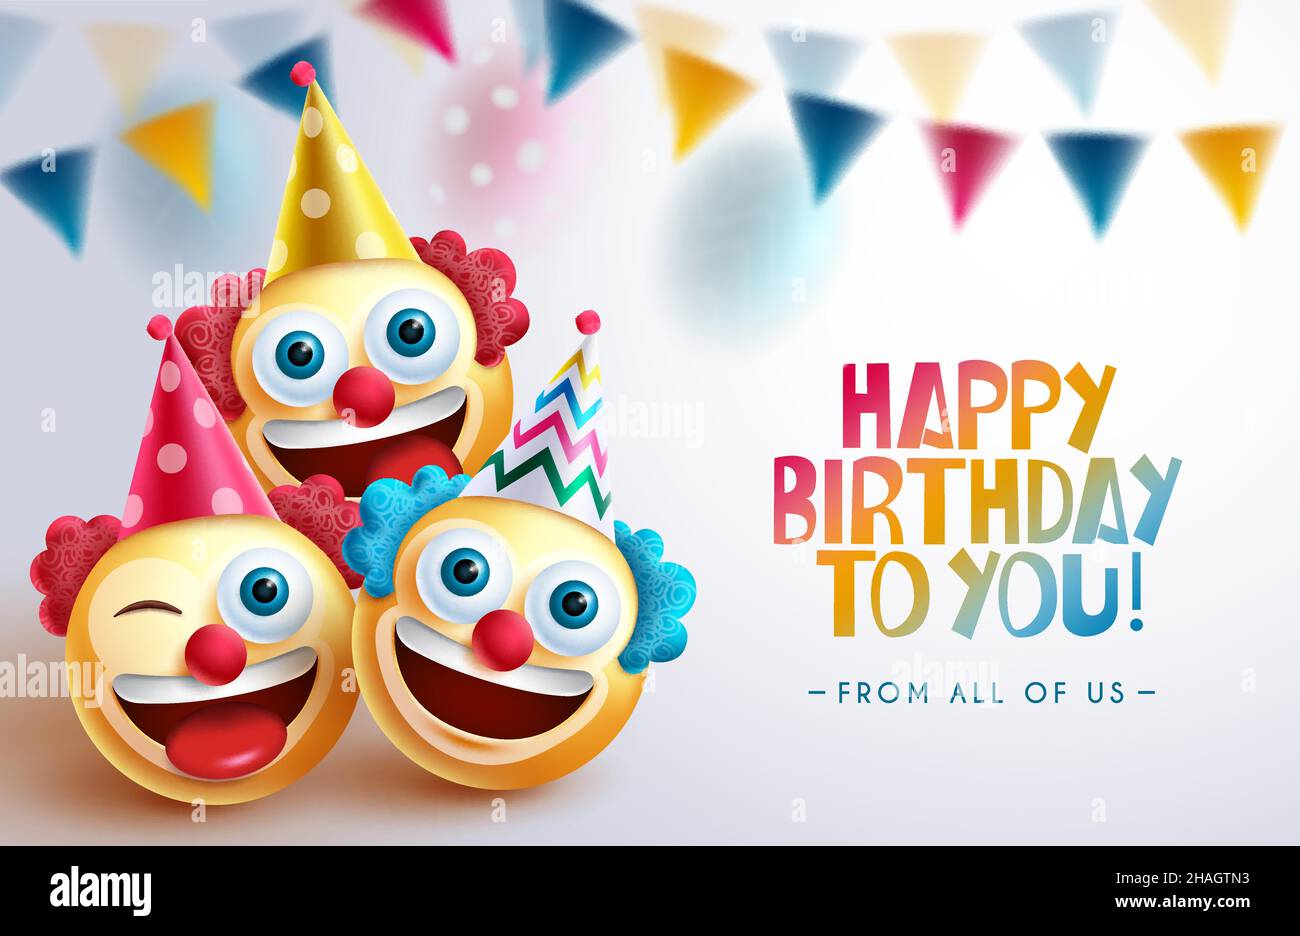 Birthday clowns vector background design. Happy birthday greeting text with smileys clown character in funny and smiling faces for fun and enjoy. Stock Vector